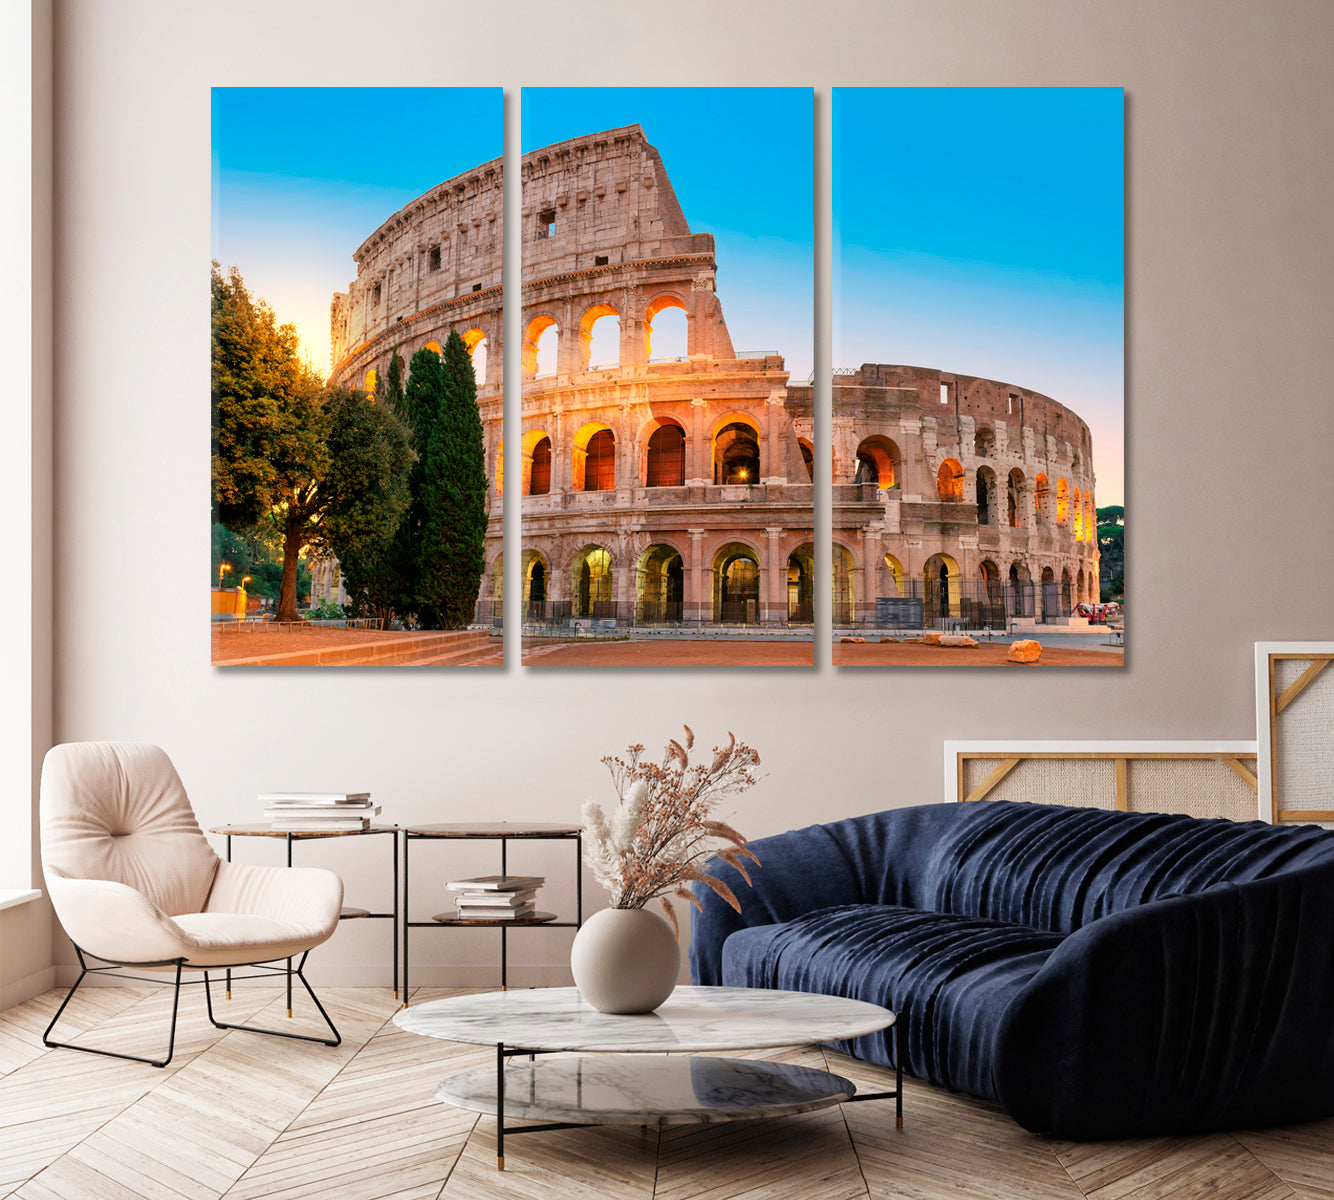 Famous Colosseum in Rome Italy Canvas Print-Canvas Print-CetArt-1 Panel-24x16 inches-CetArt